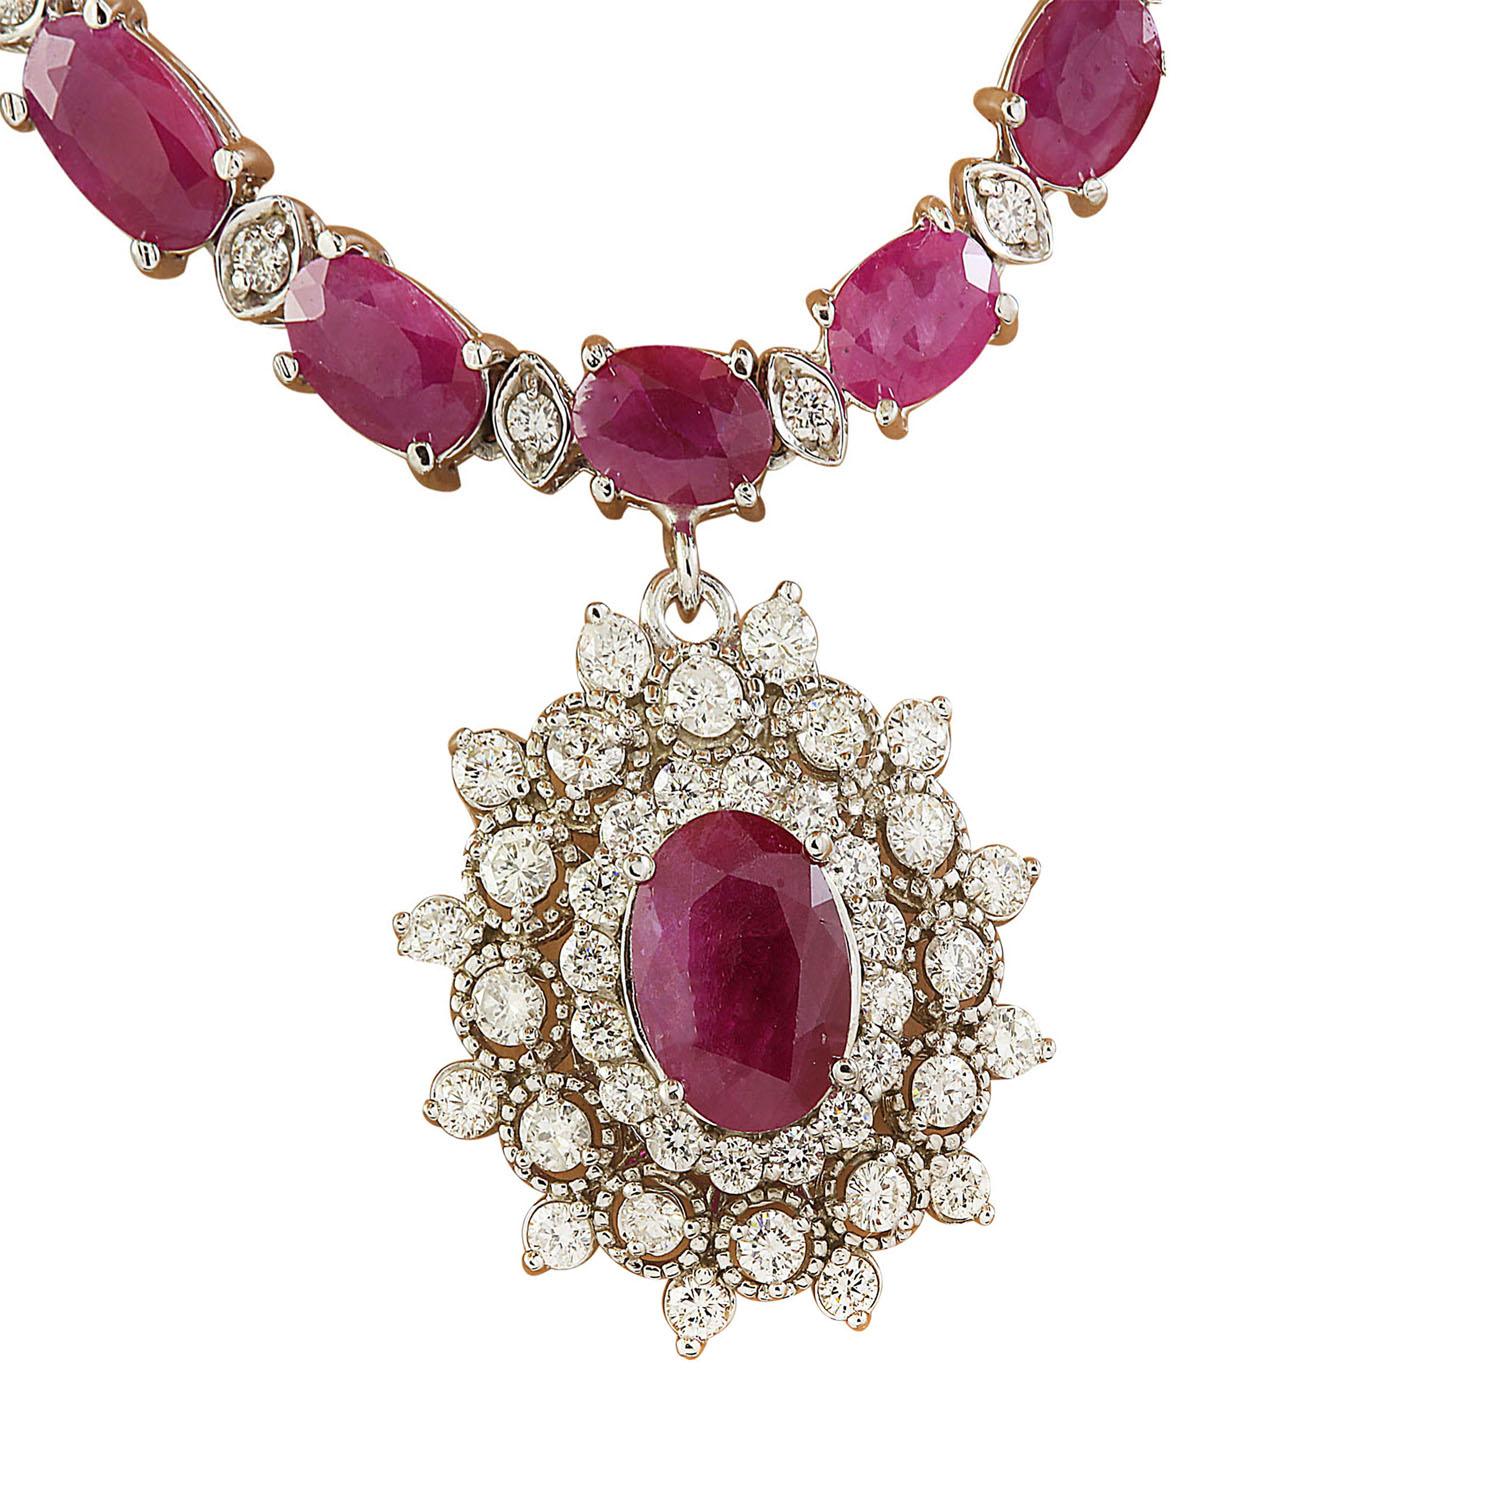 28.11 Carat Natural Ruby 14 Karat Solid White Gold Diamond Necklace
Stamped: 14K
Total Necklace Weight: 30 Grams
Necklace Length: 18 Inches
Center Ruby Weight: 2.31 Carat (9.00x7.00 Millimeters)
Side Ruby WeighT 23.00 Carat (6.00x4.00